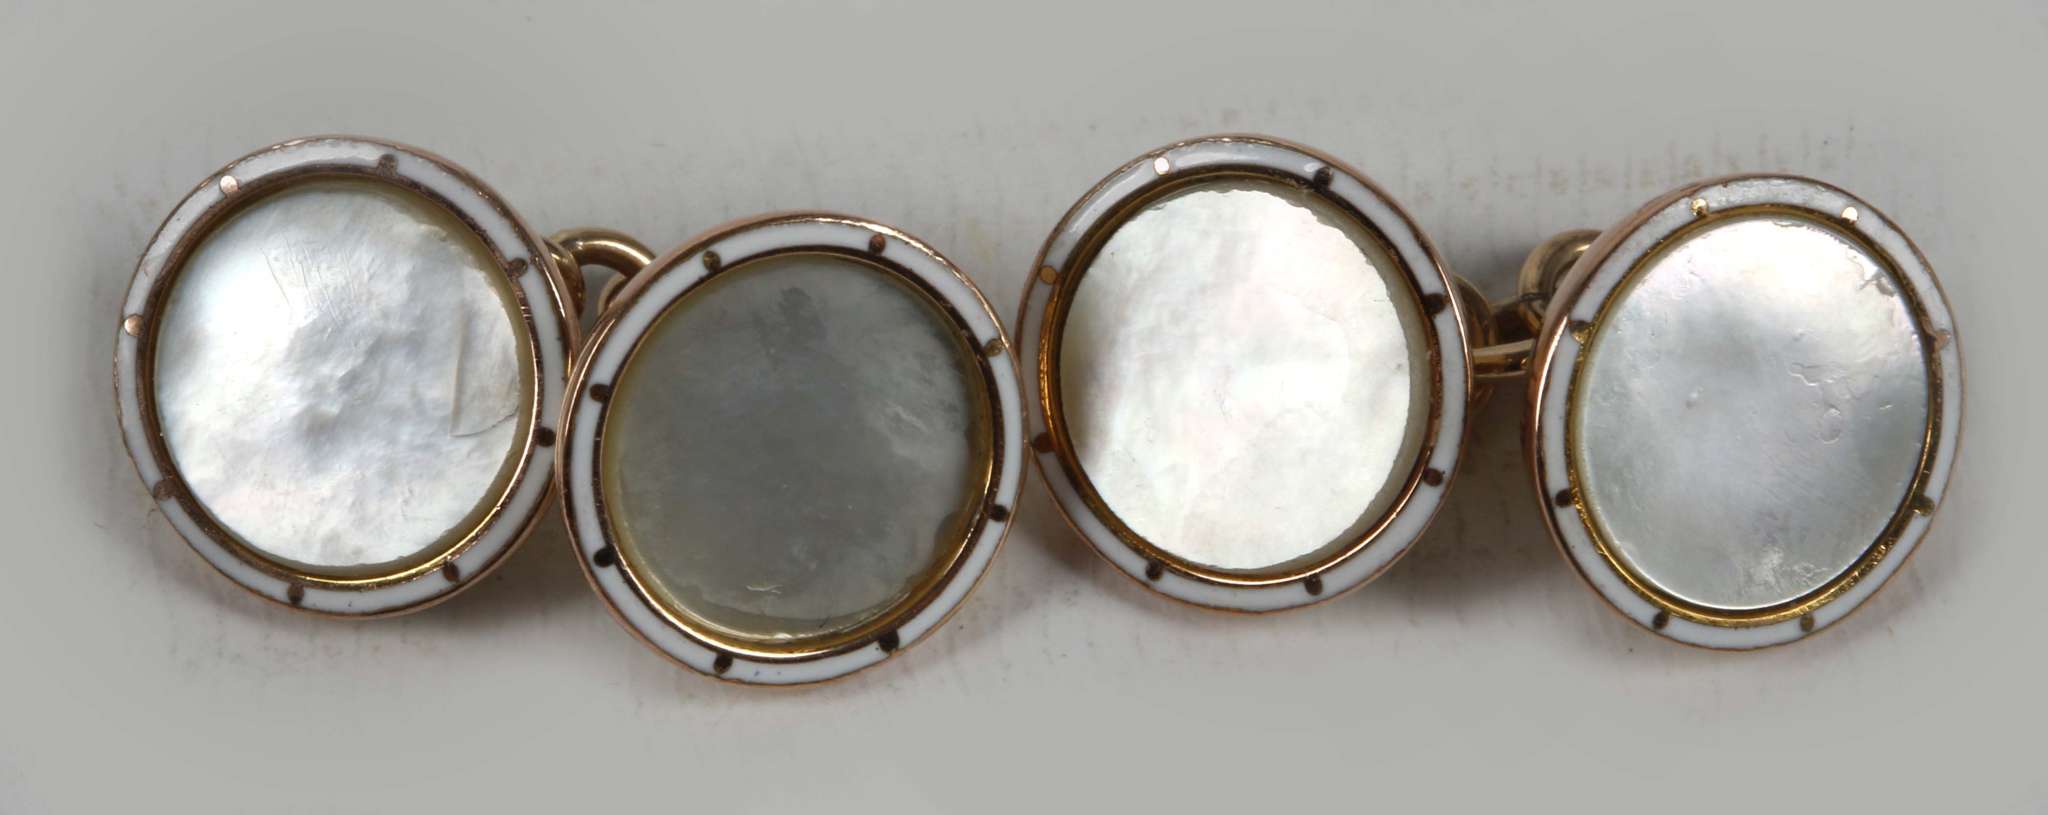 A pair of white enamel and mother of pearl 9ct gold cuff links